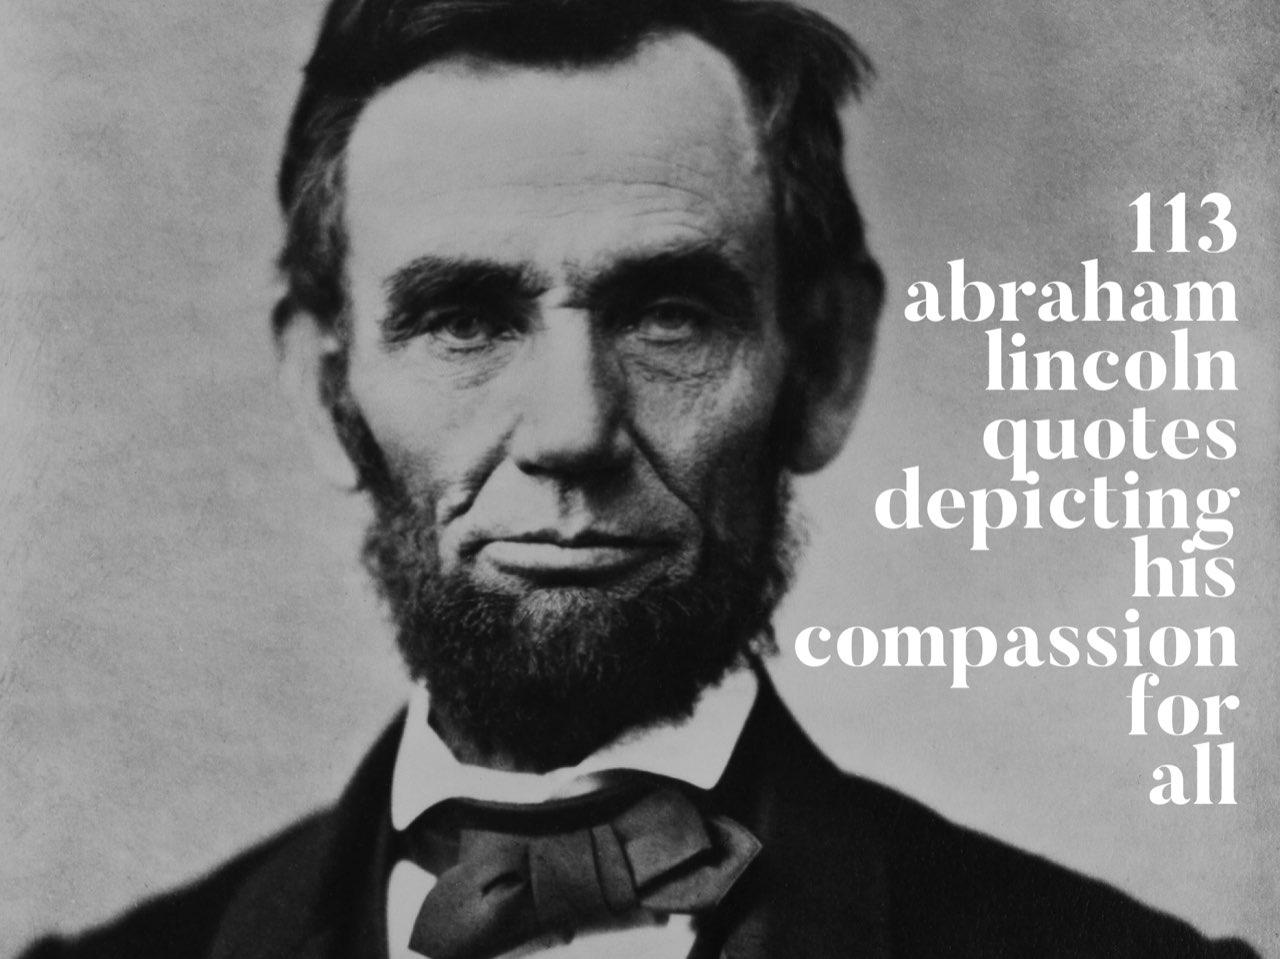 Abraham Lincoln Quotes Depicting His Compassion For All